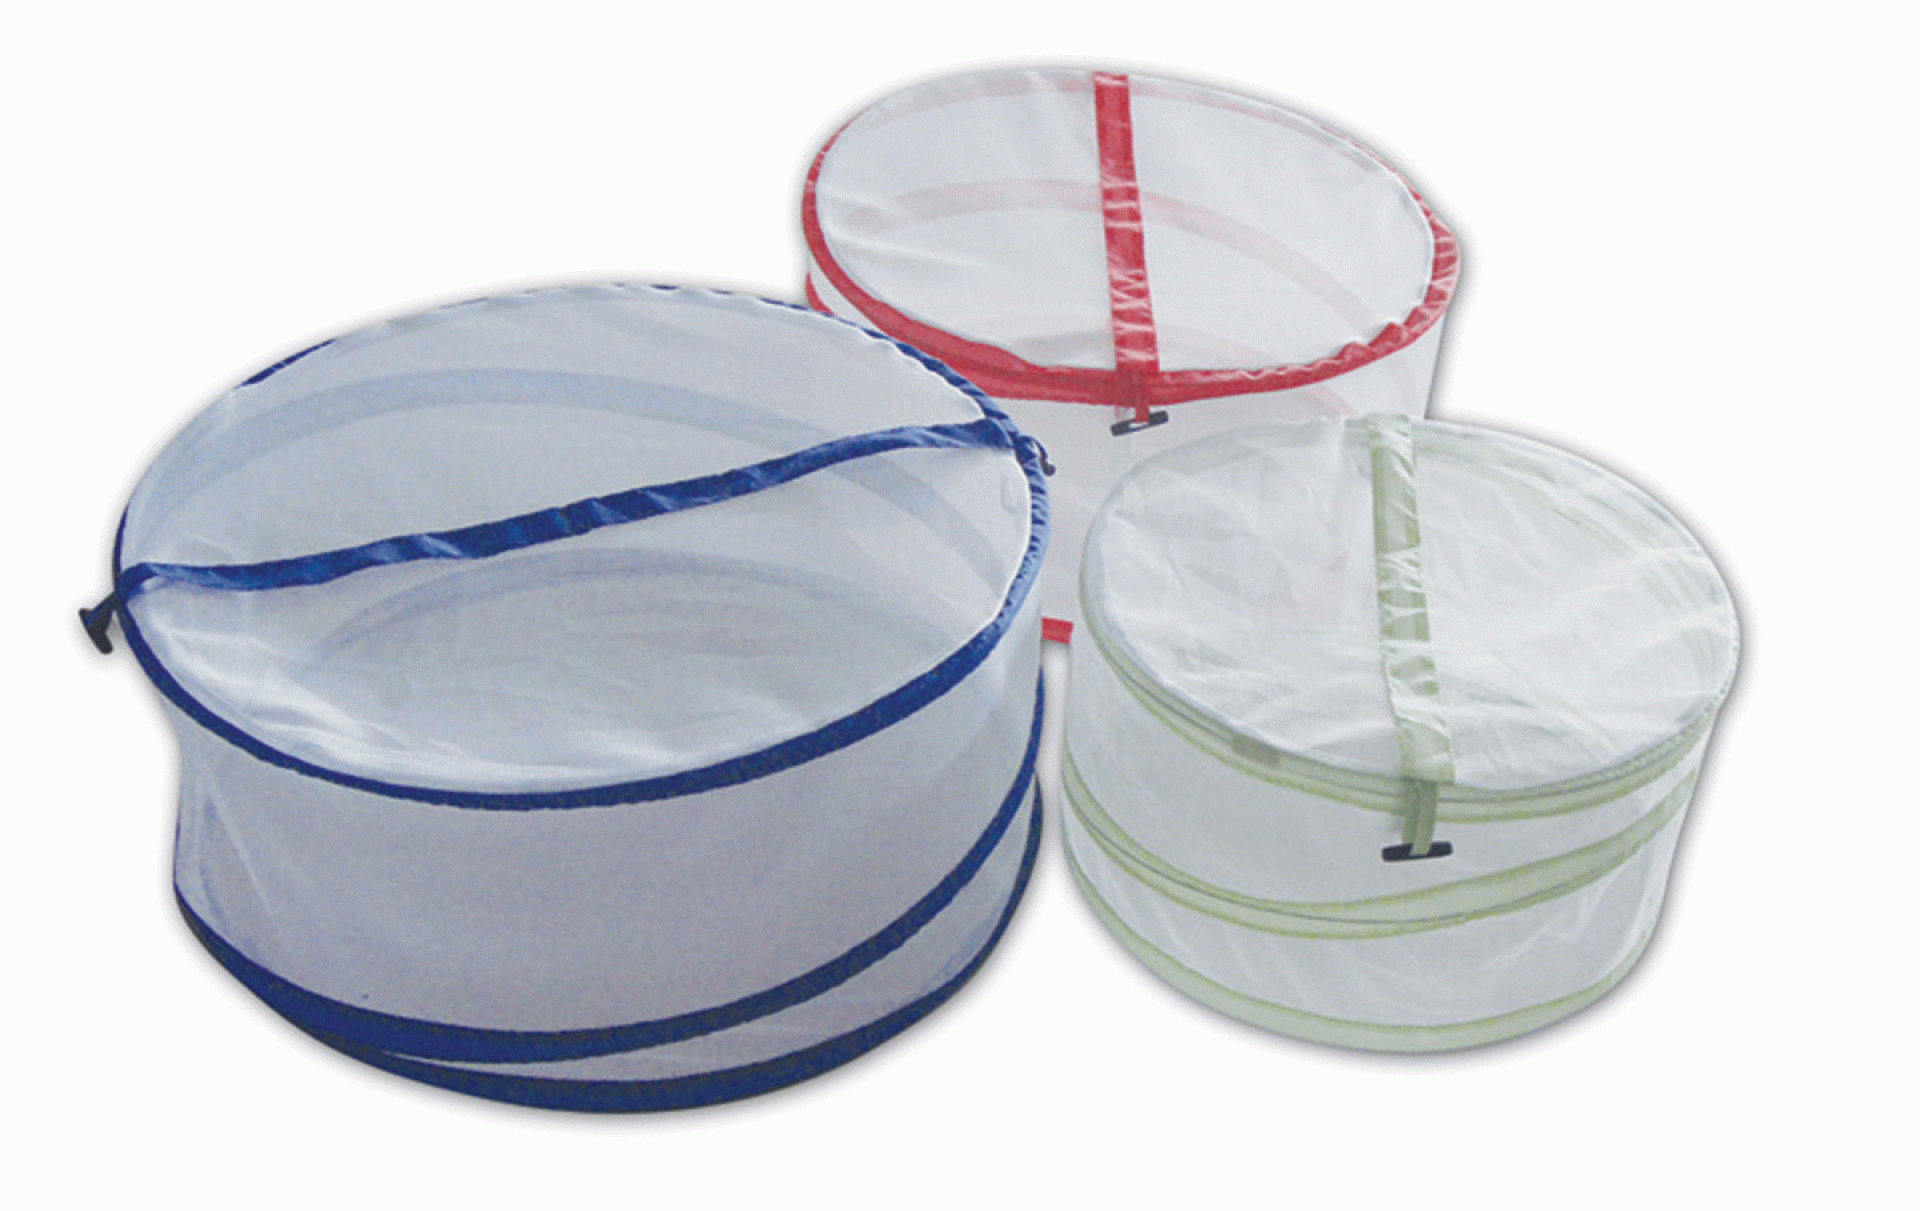 MINGS MARK INC. | FC-68102 | COLLAPSIBLE MESH FOOD COVERS - 3 Pc. Set